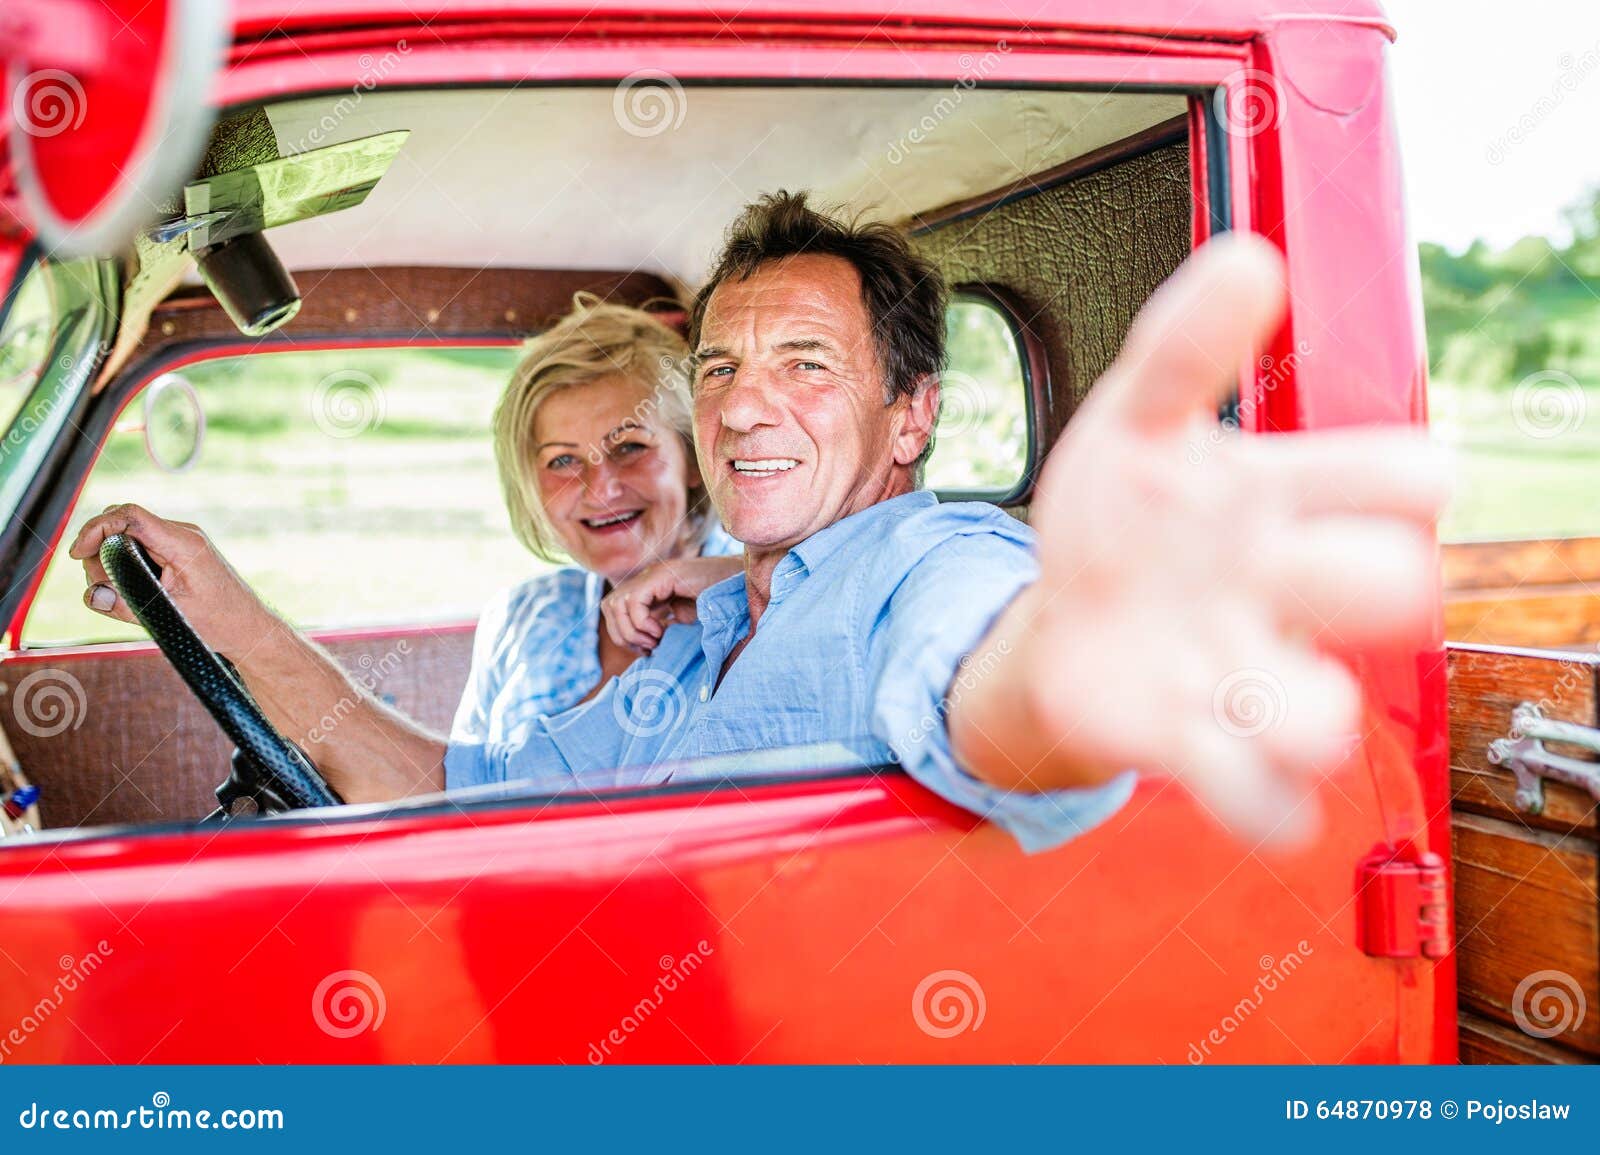 Senior couple in red car stock photo. Image of mature - 64870978